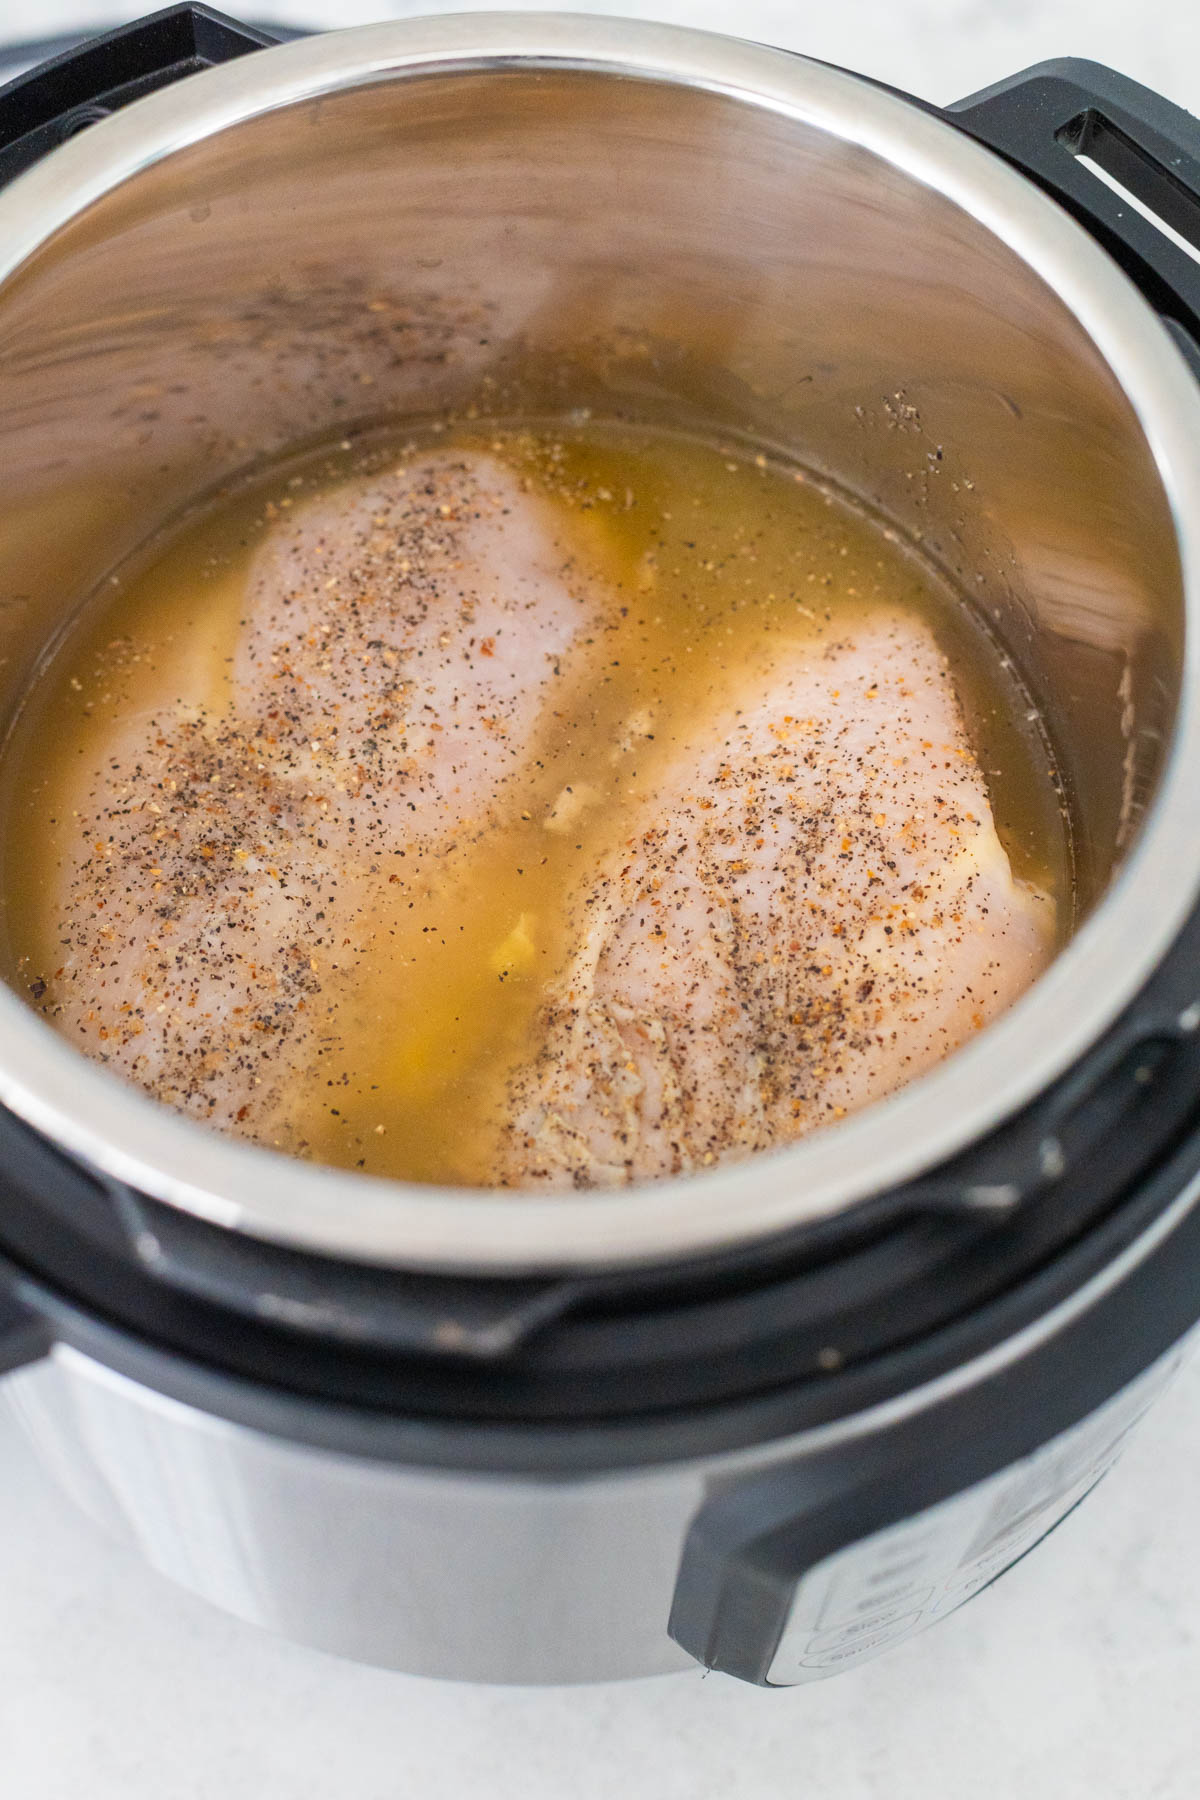 The chicken breasts have been set into the Instant Pot with the chicken stock.